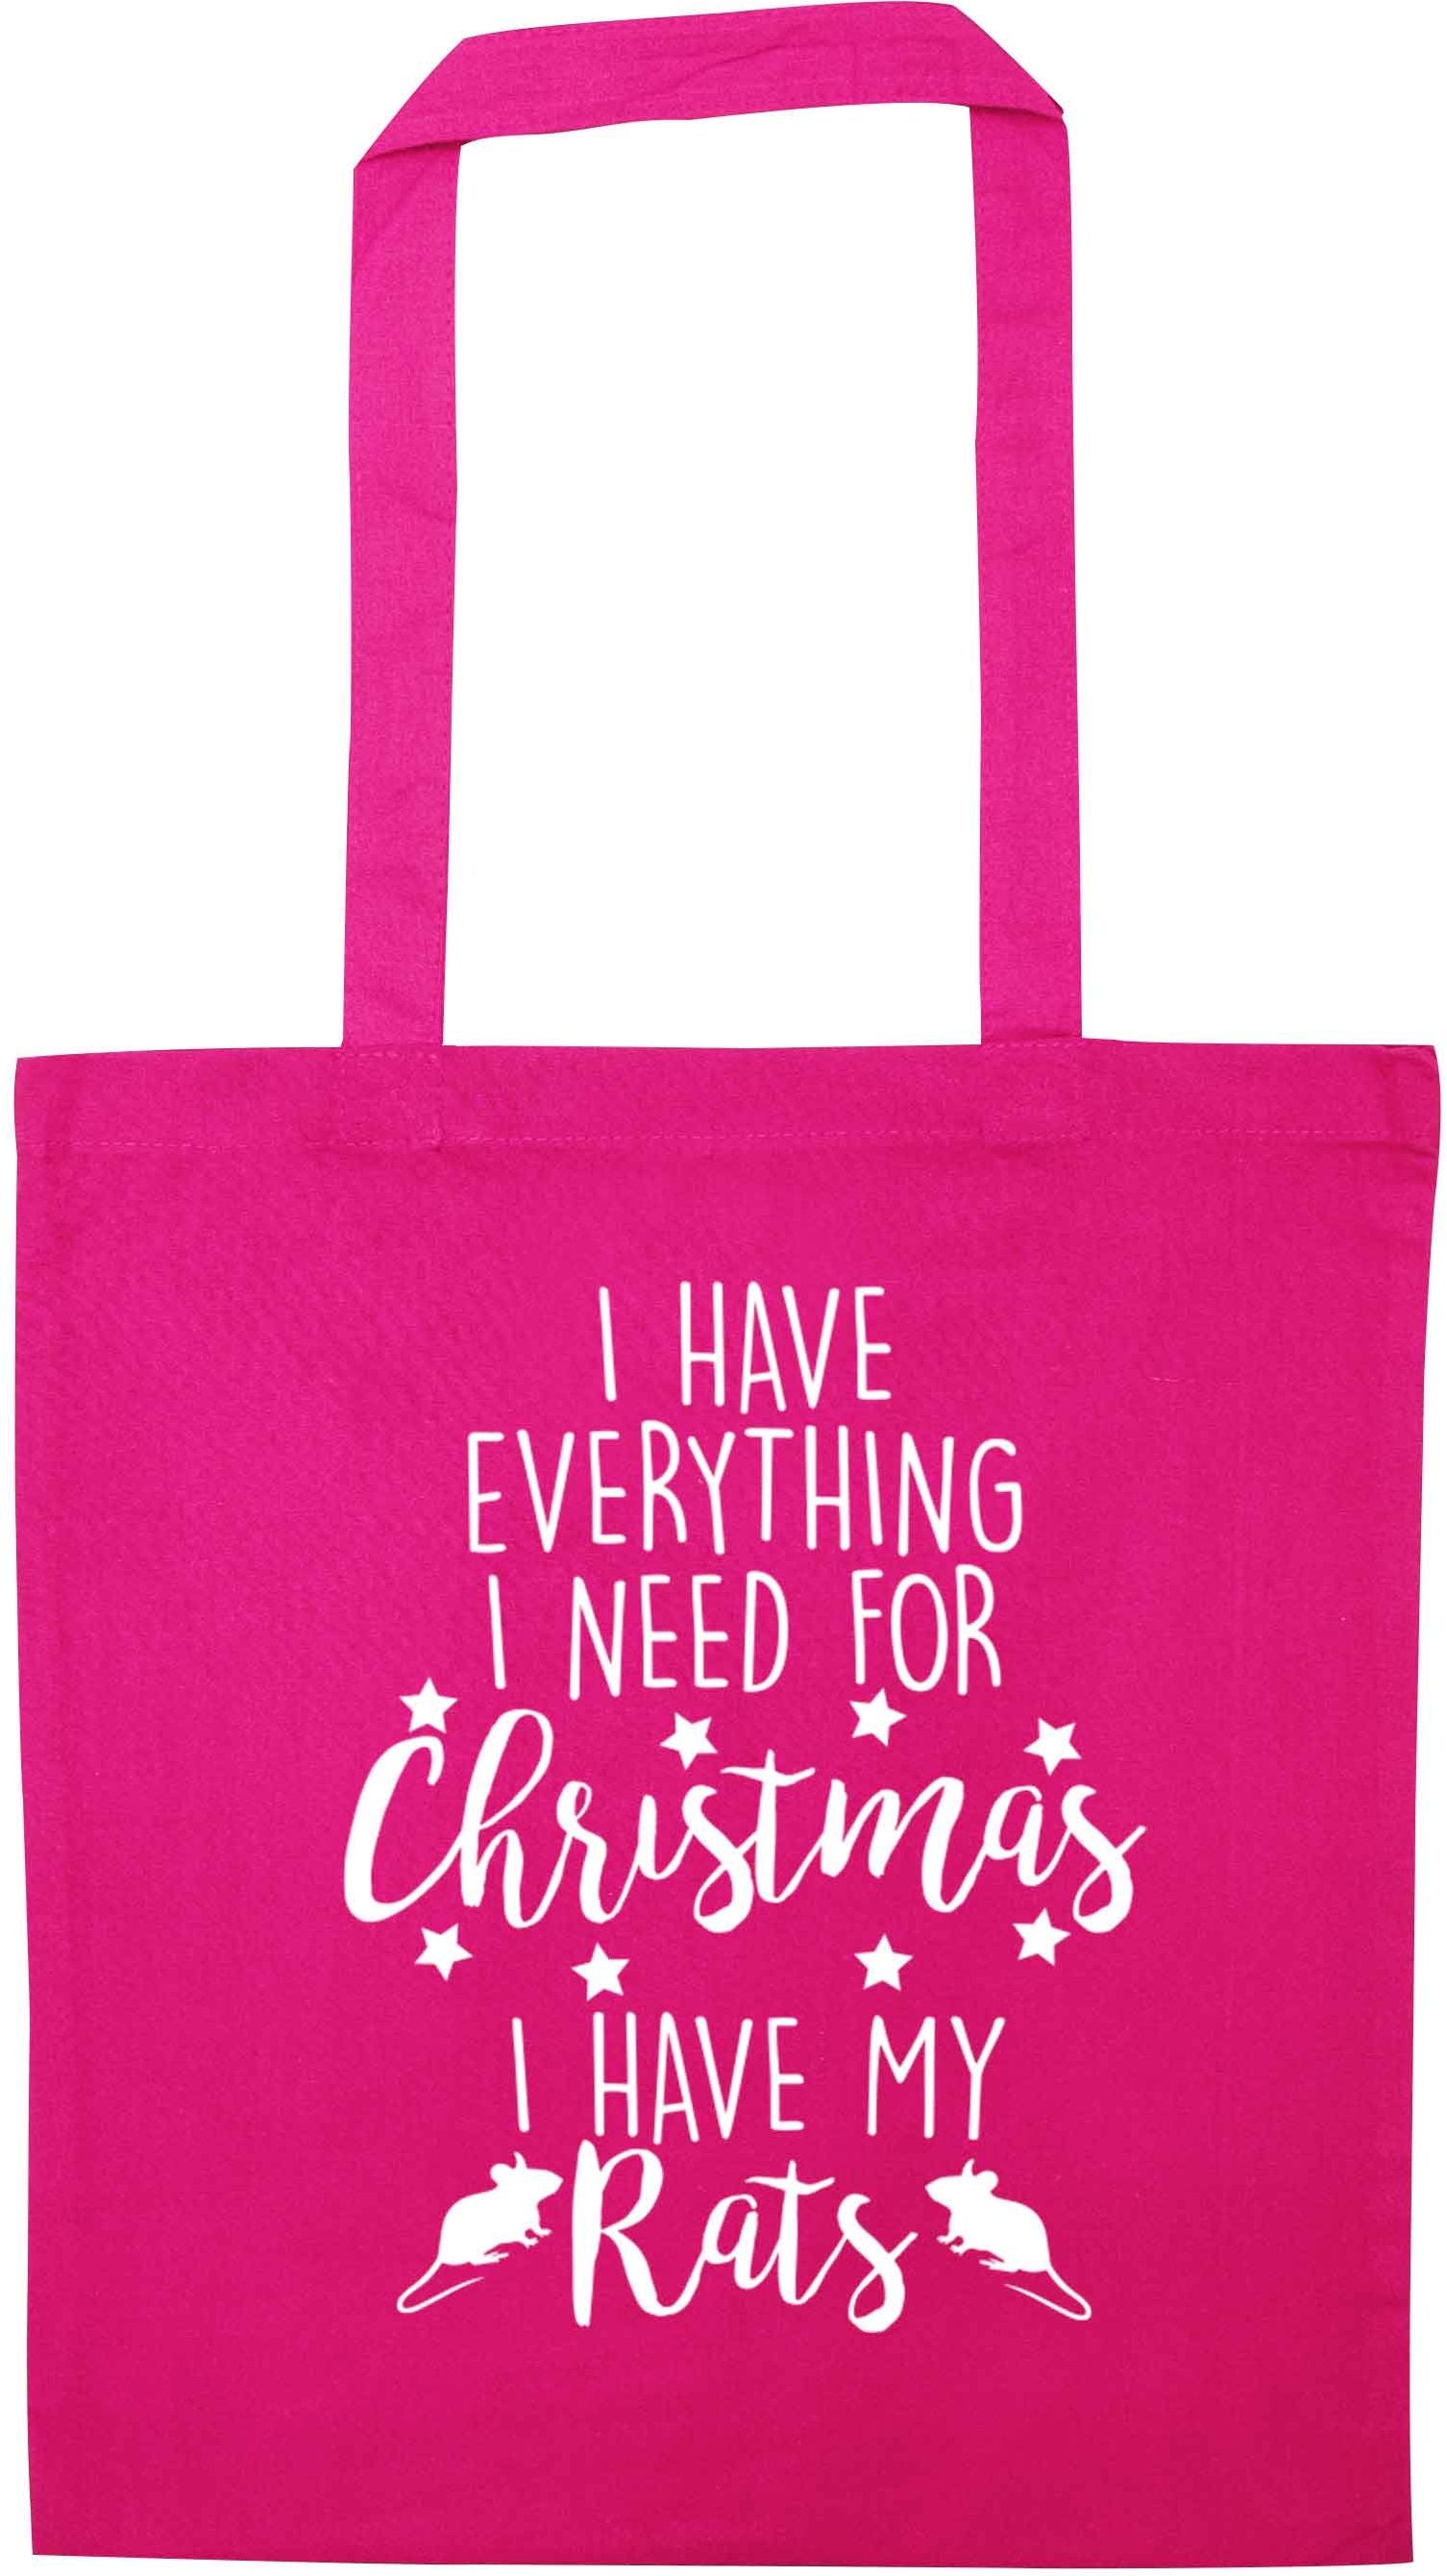 I have everything I need for Christmas I have my rats pink tote bag